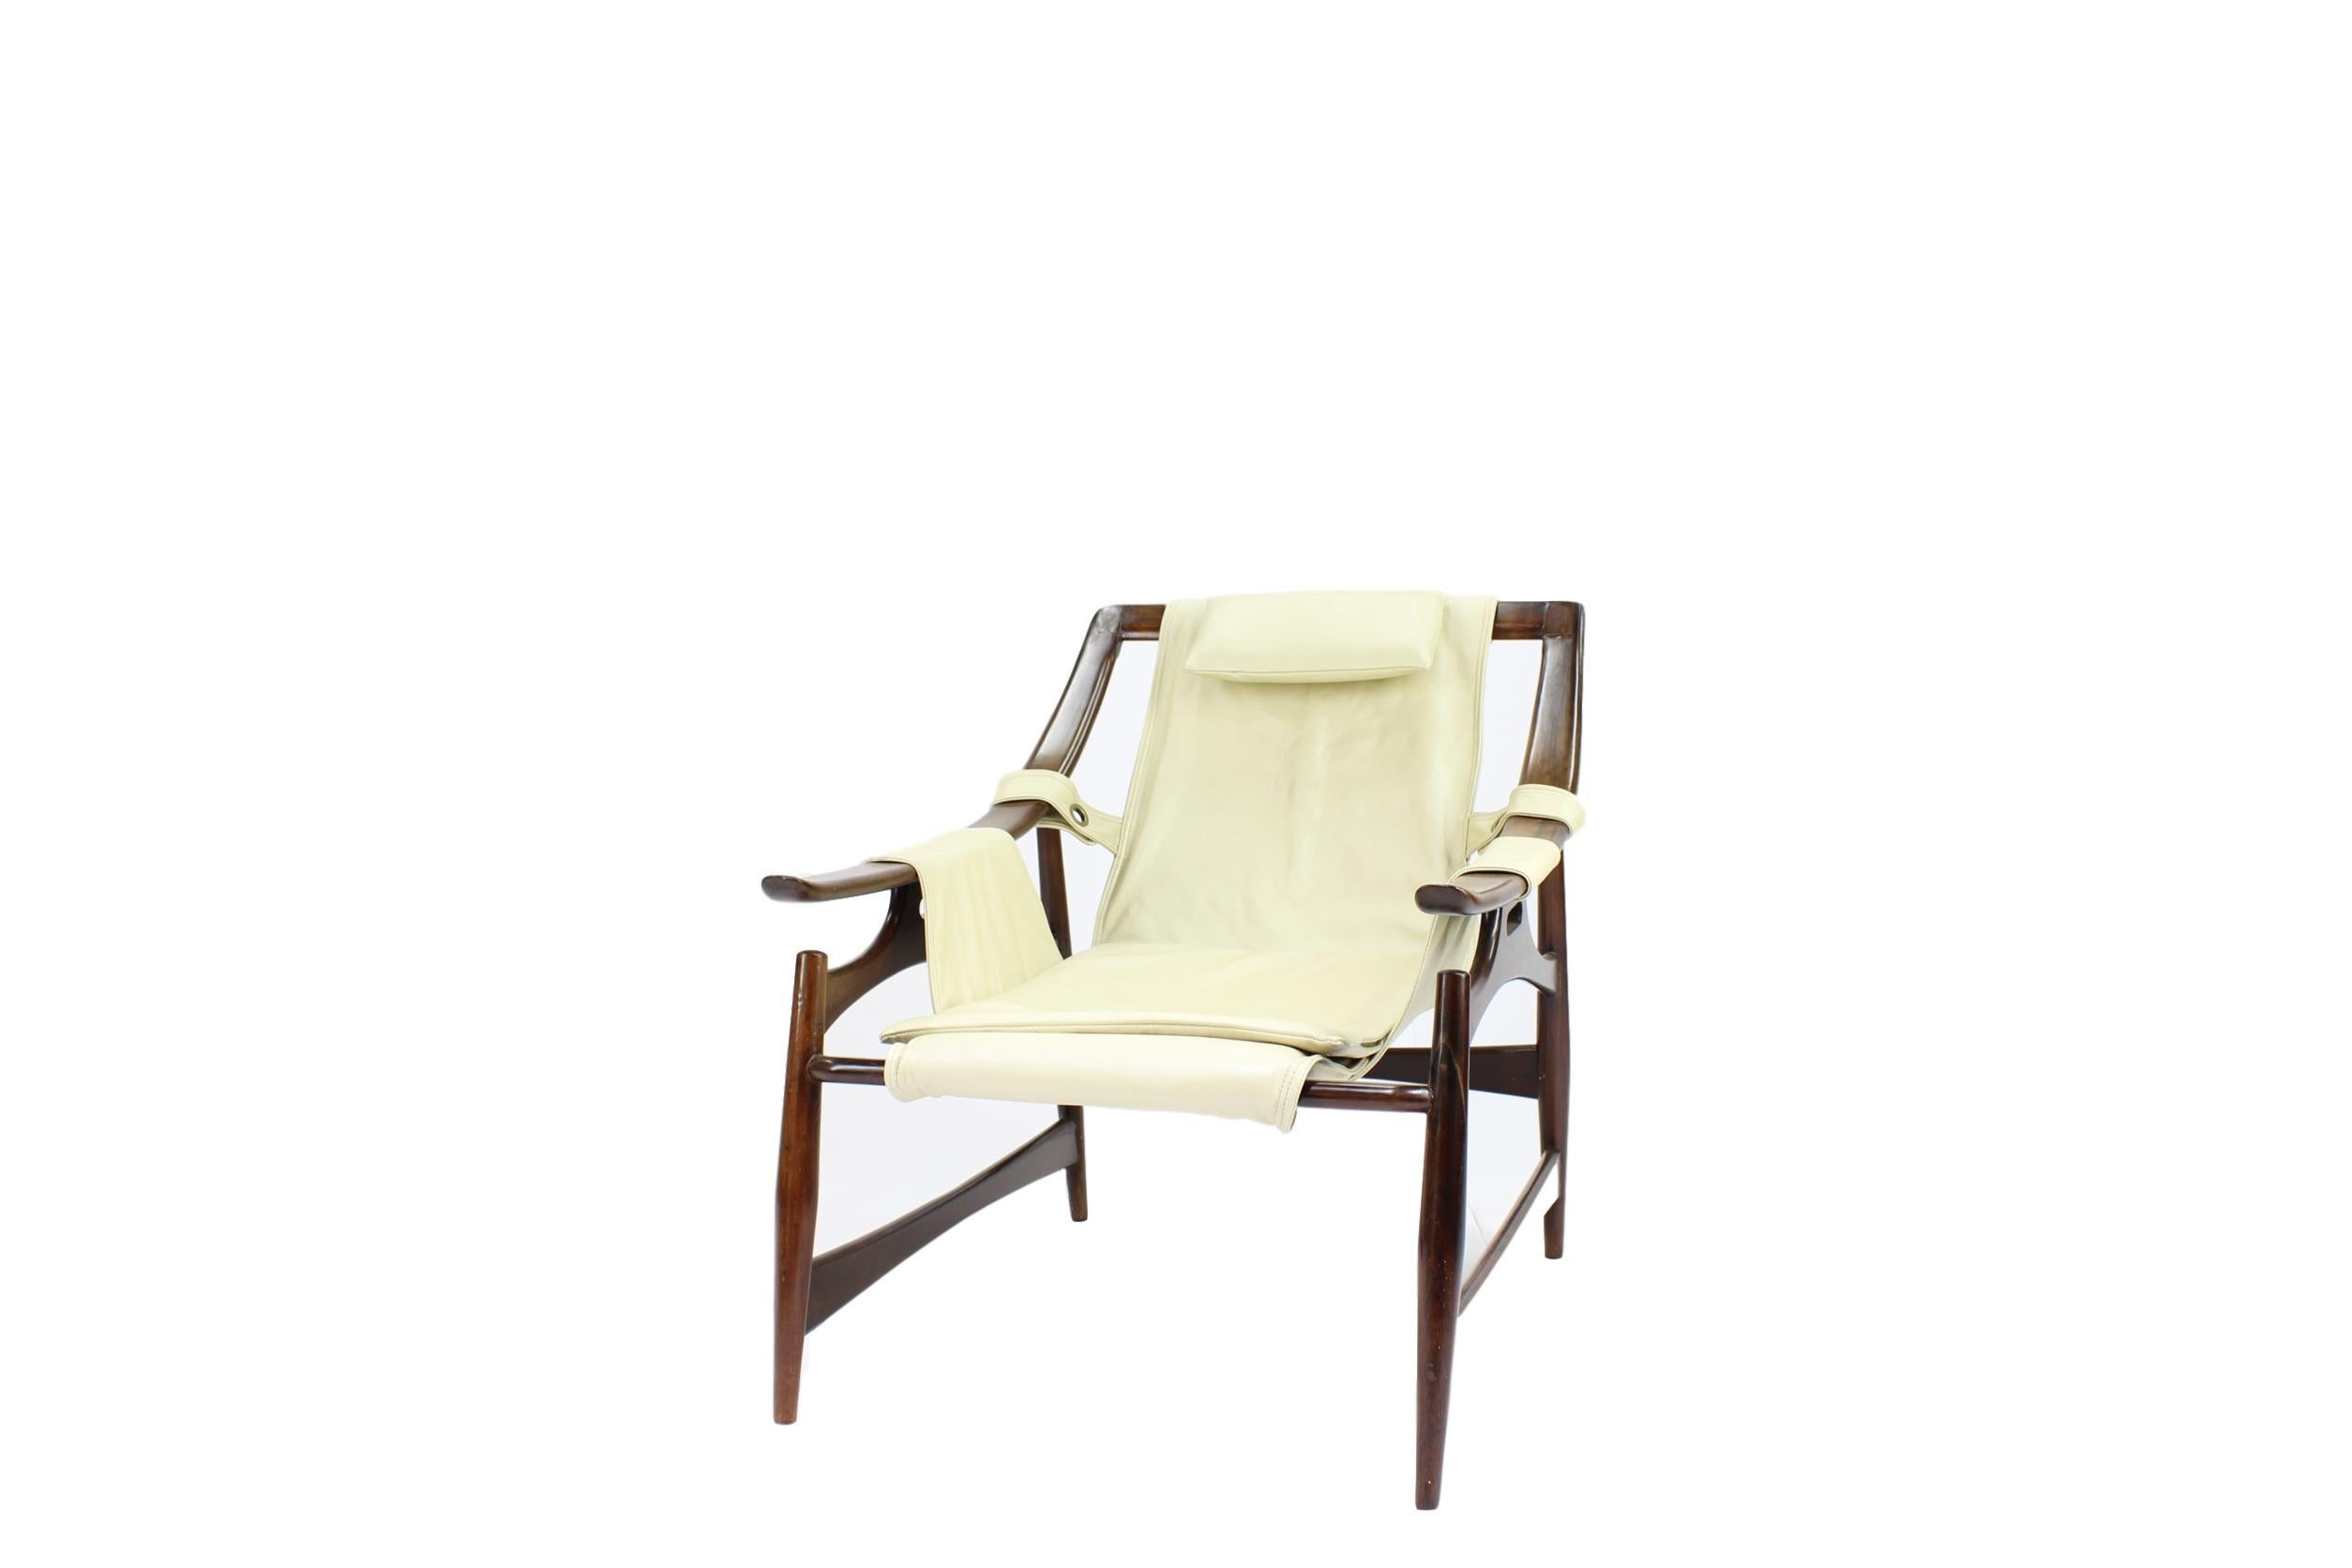 Liceu de Artes e Ofiicios, lounge chair, Brazil, 1960s.

The construction of the frame is created according to a skeleton layout. The design holds an open character with admiring lines and curves. The seating consists of dark brown suede, which